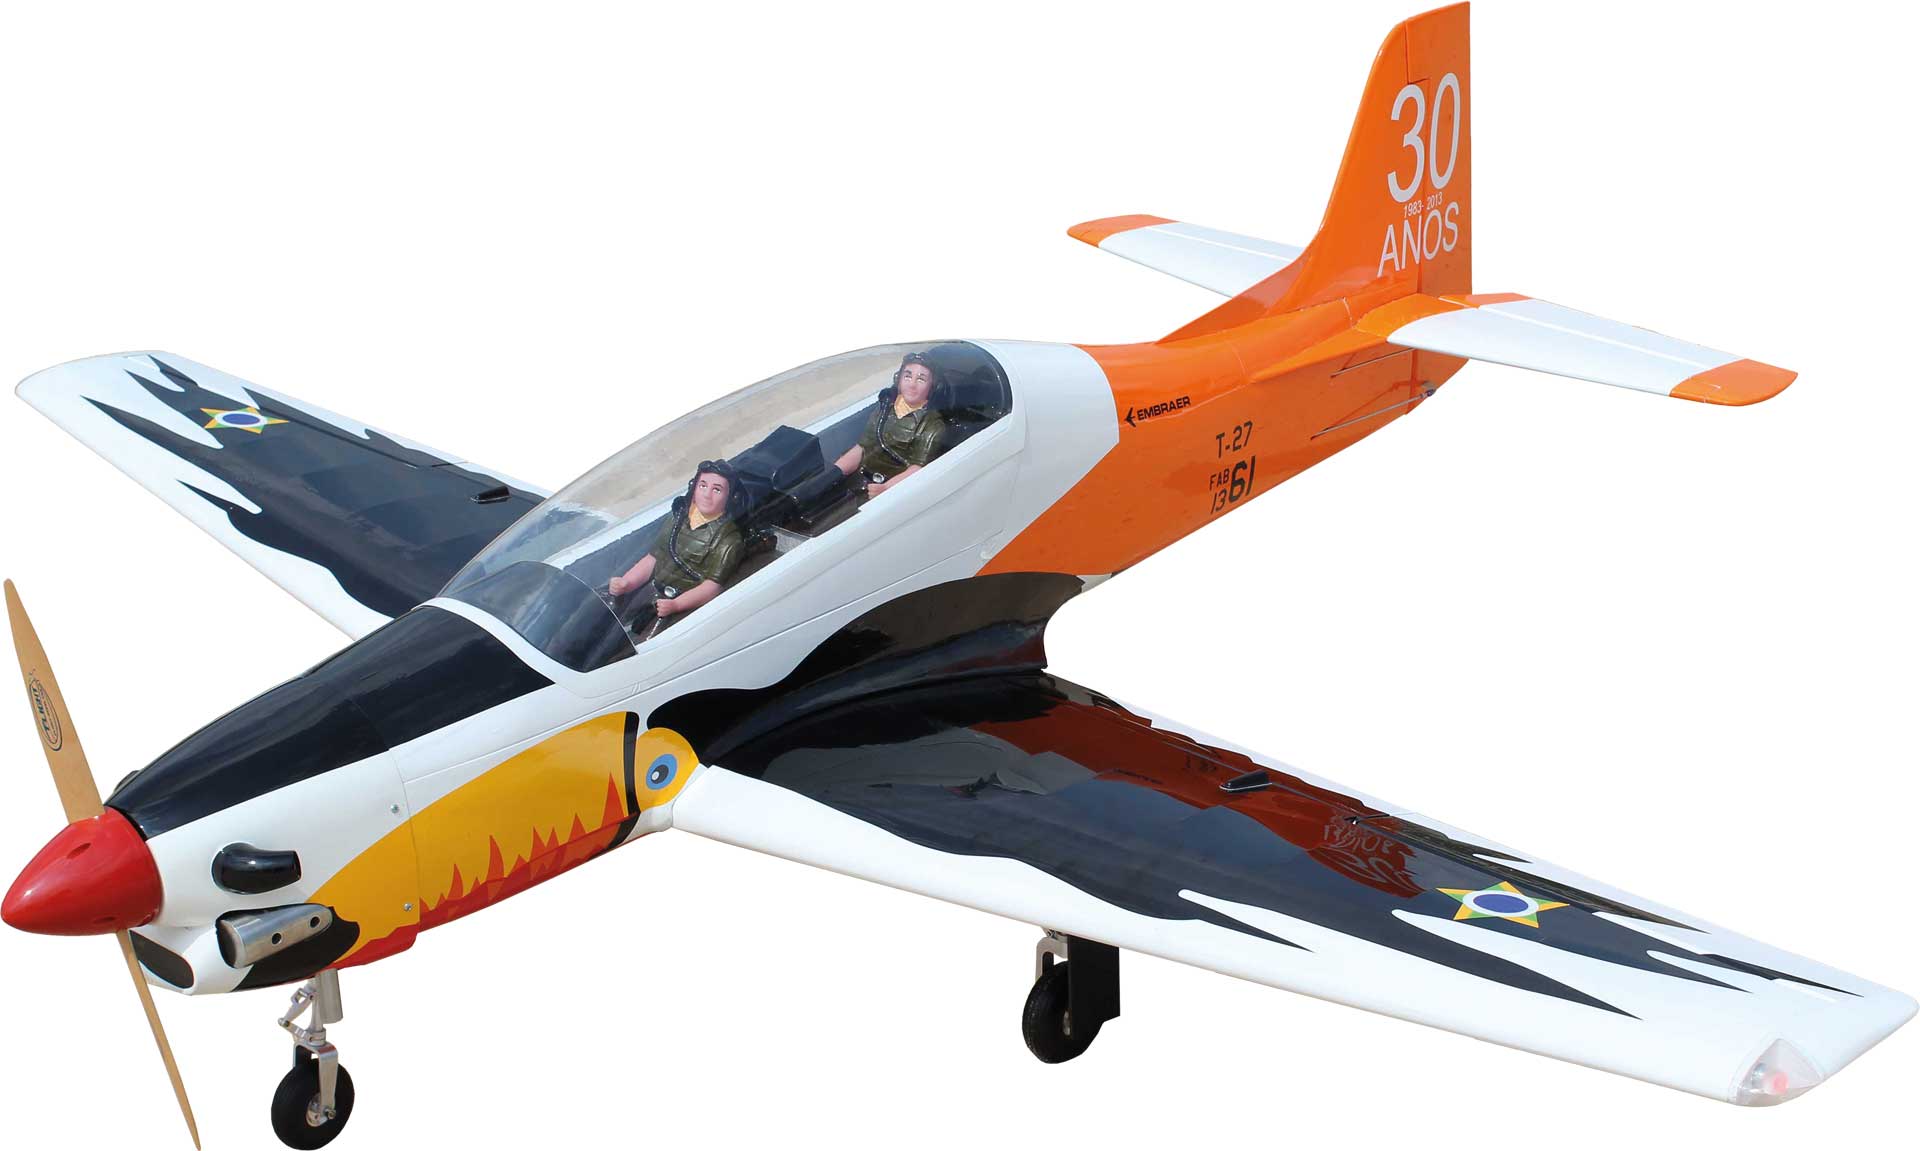 Seagull Models ( SG-Models ) Embraer T-27 Tucano 85" 35-40cc with electric retract landing gear ER-150 85°